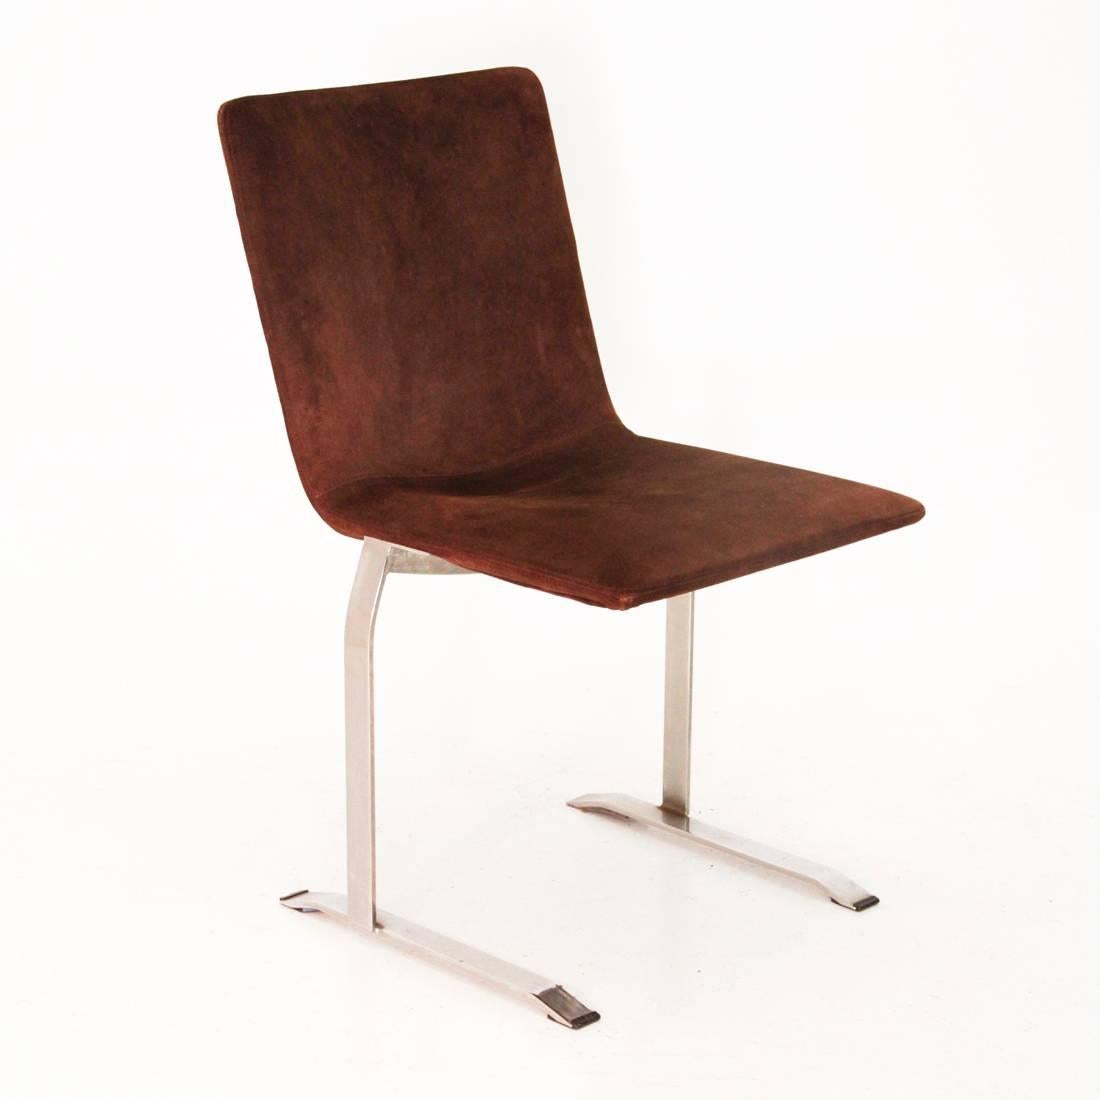 This chair was designed during the 1970s by Giovanni Offredi and manufactured for Saporiti in Italy. The structure is made of chromed steel, covered with a removable brown microfiber.